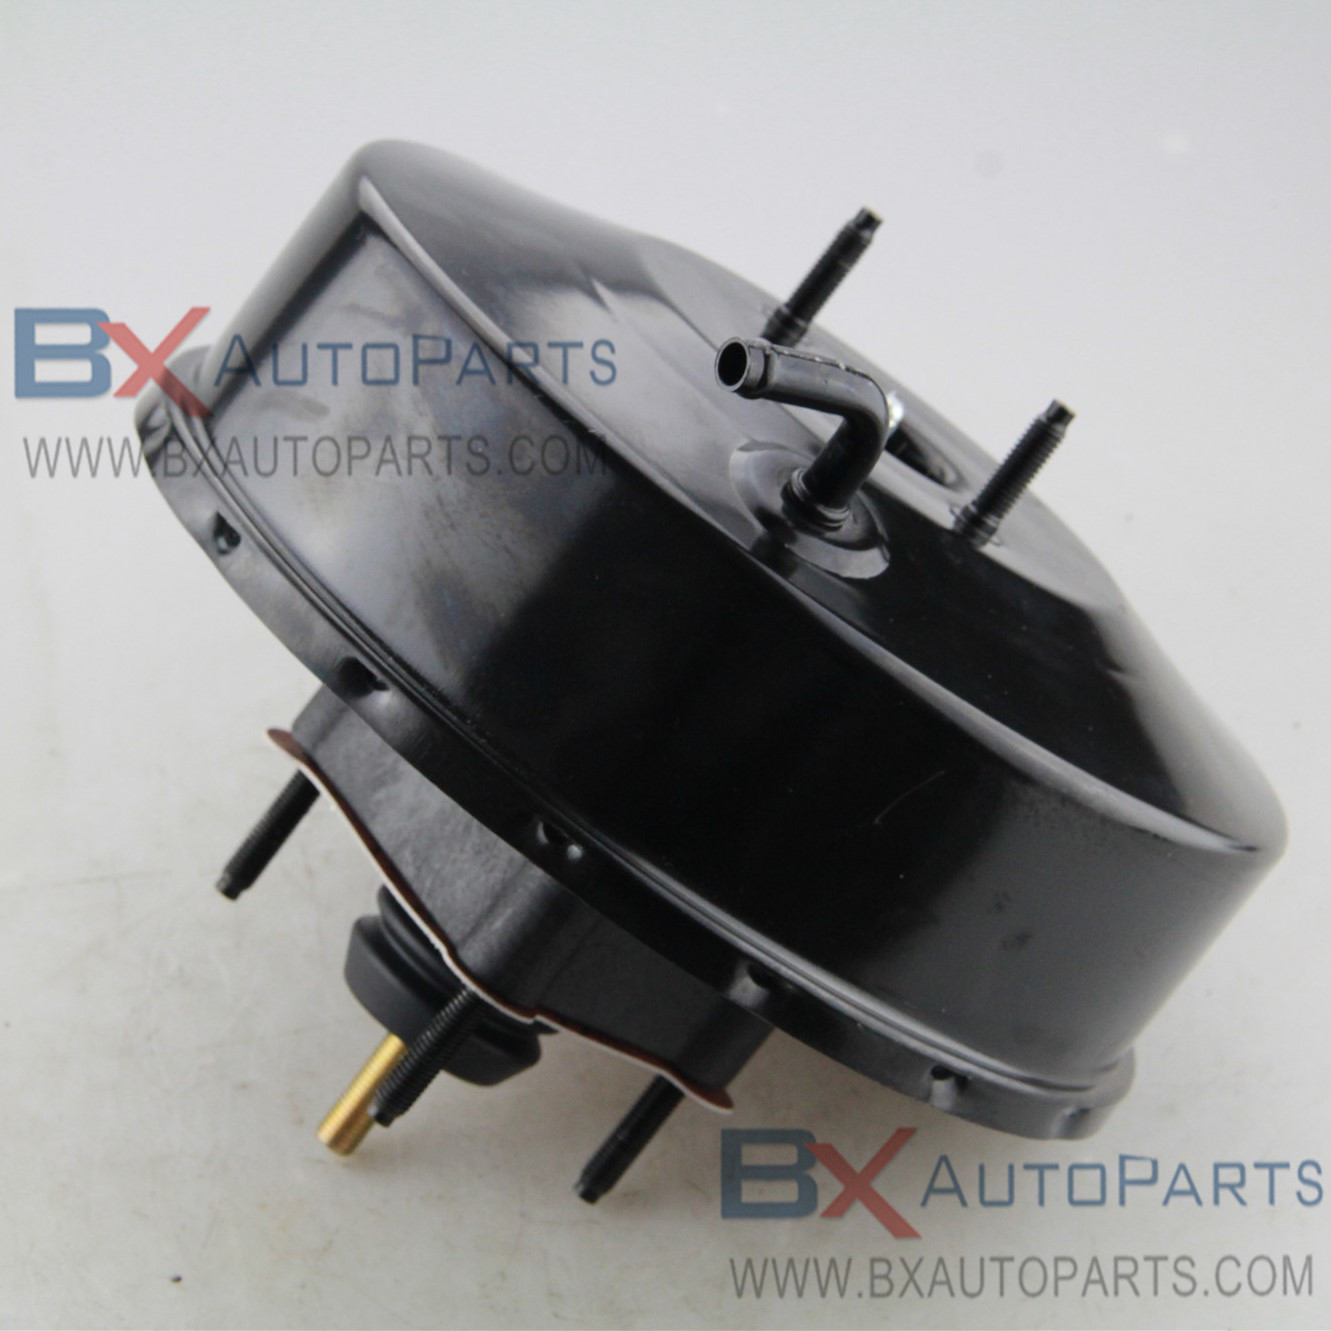 BRAKE BOOSTER FOR HYUNDAI ACCENT 2000-2003 59110-1A000